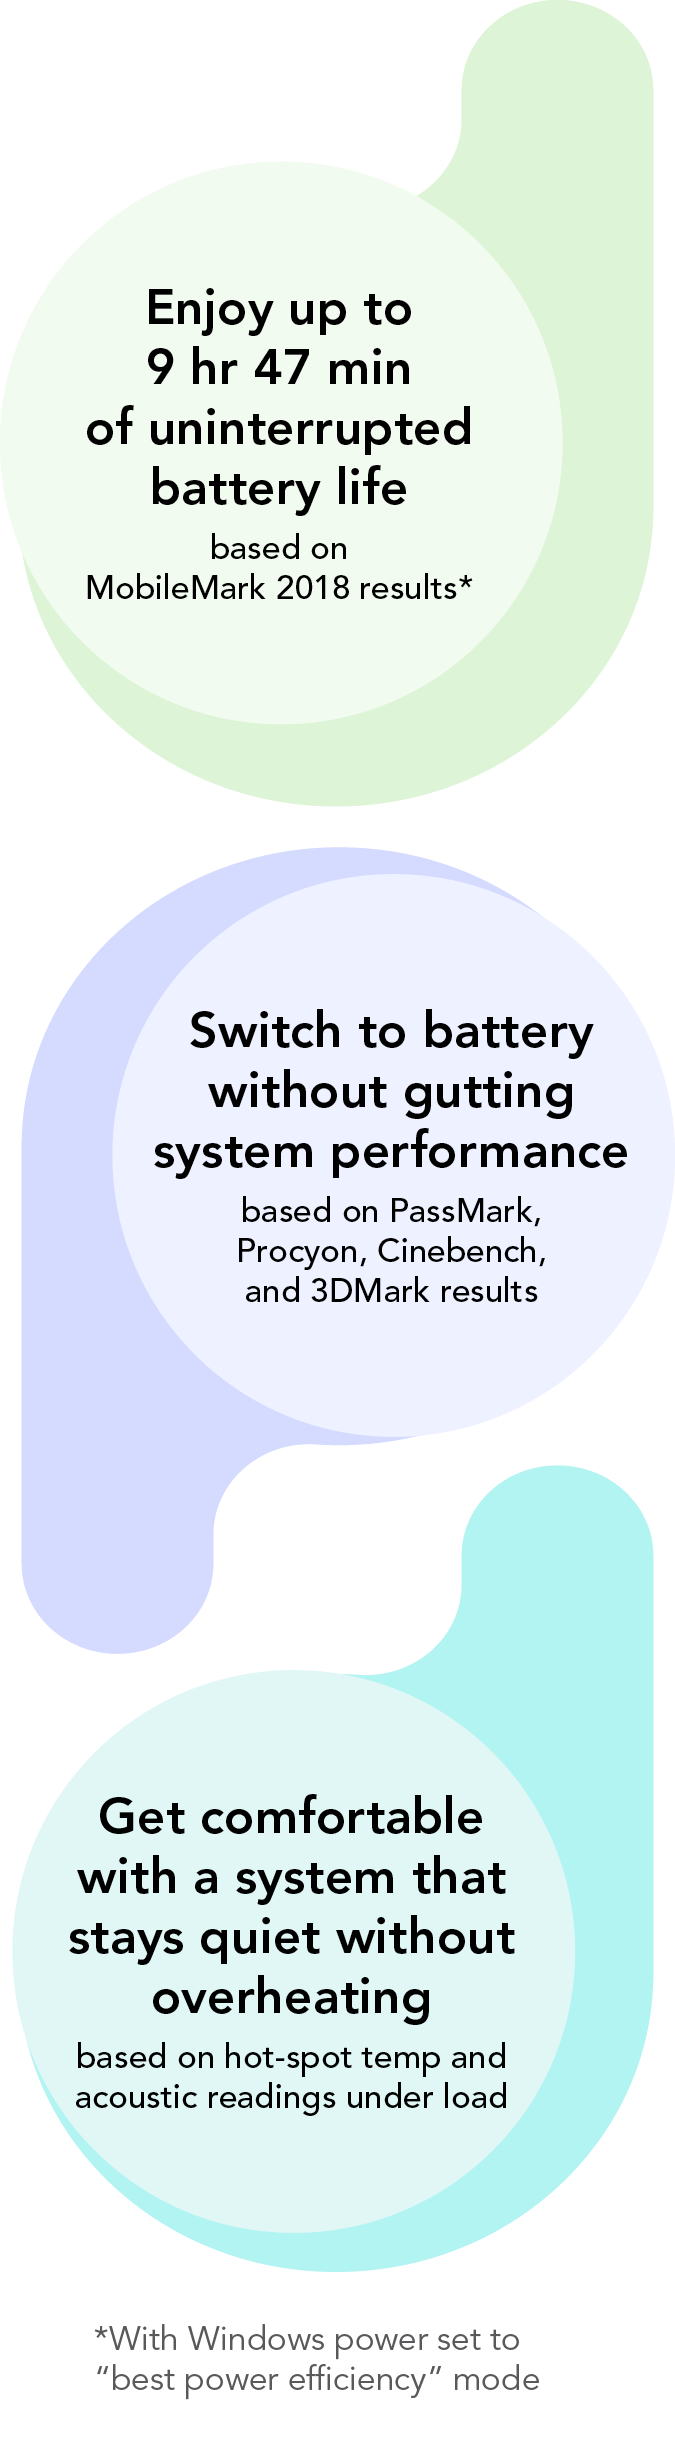 Enjoy up to 9 hours and 47 minutes of uninterrupted battery life based on MobileMark 2018 results. With Windows power set to “best power efficiency” mode. Switch to battery without gutting system performance based on PassMark, Procyon, Cinebench, and 3DMark results. Get comfortable with a system that stays quiet without overheating based on hot-spot temp and acoustic readings under load.